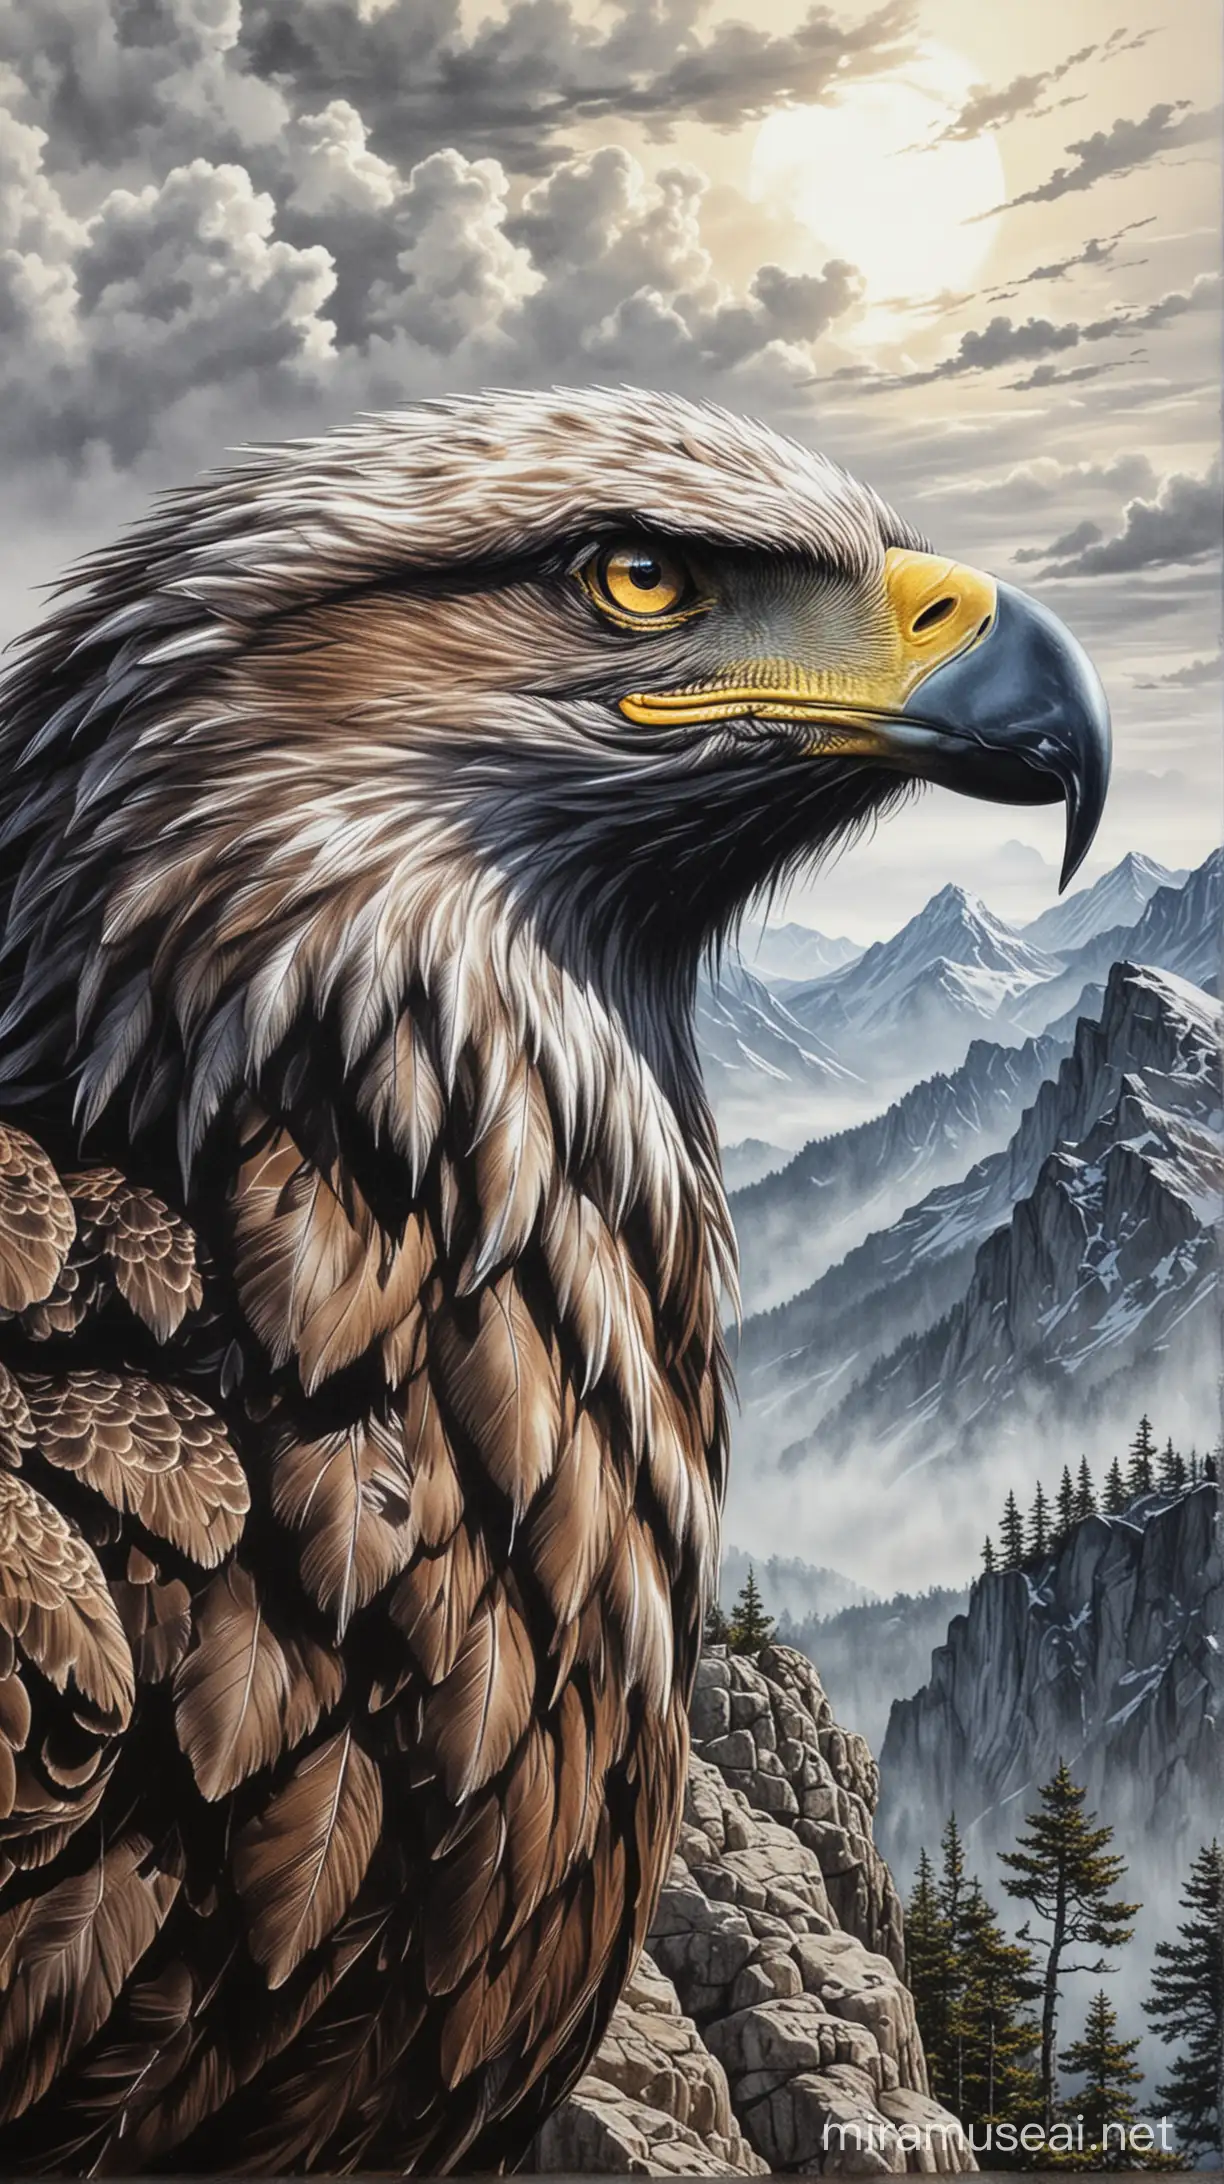 Angry Eagle Head Profile Drawing with Luminous Eyes Against Mountain Background